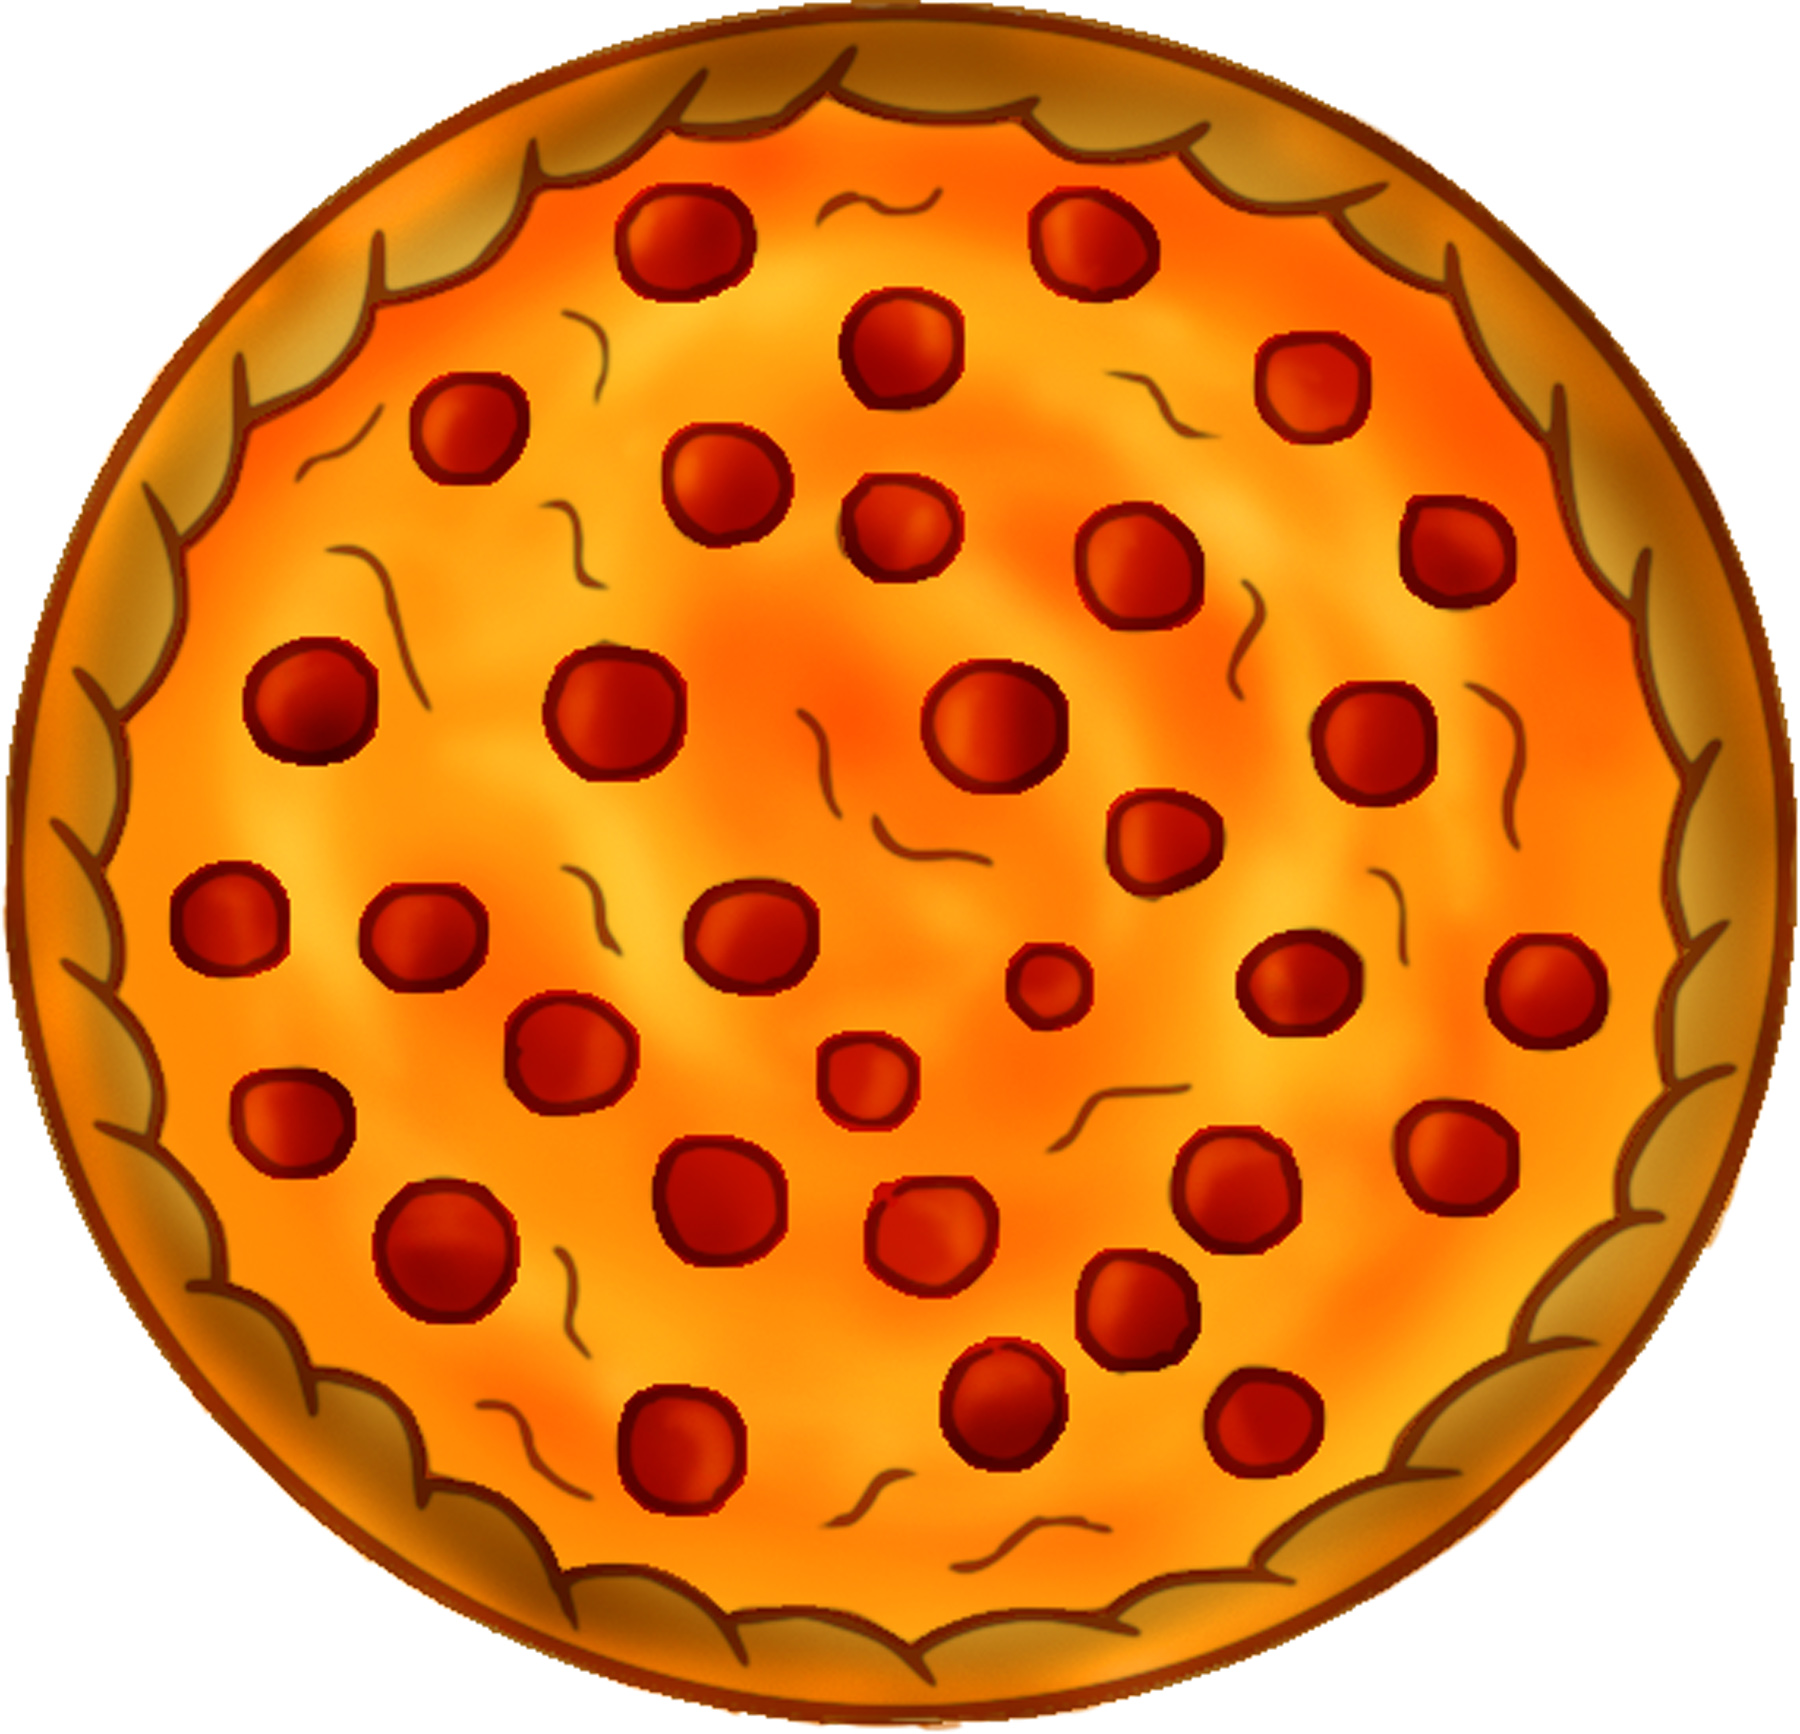 Whole cheese pizza clipart clipartfest 2